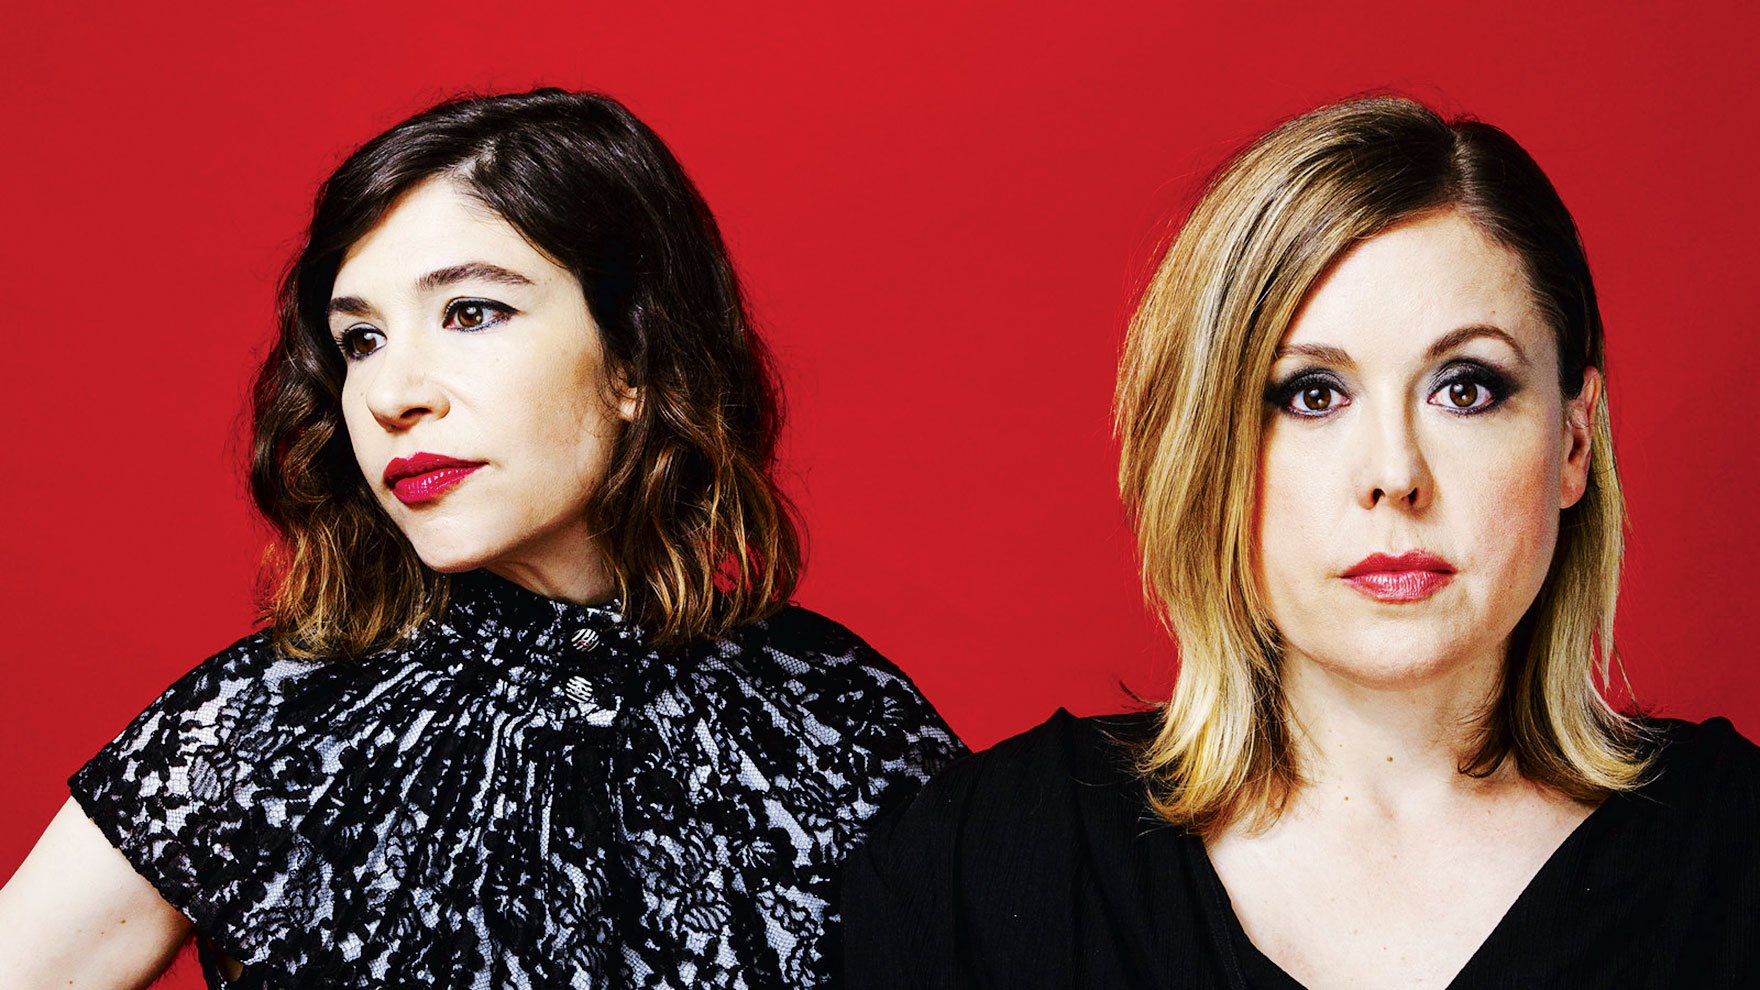 Photograph of Sleater-Kinney by Nikko Lamere.